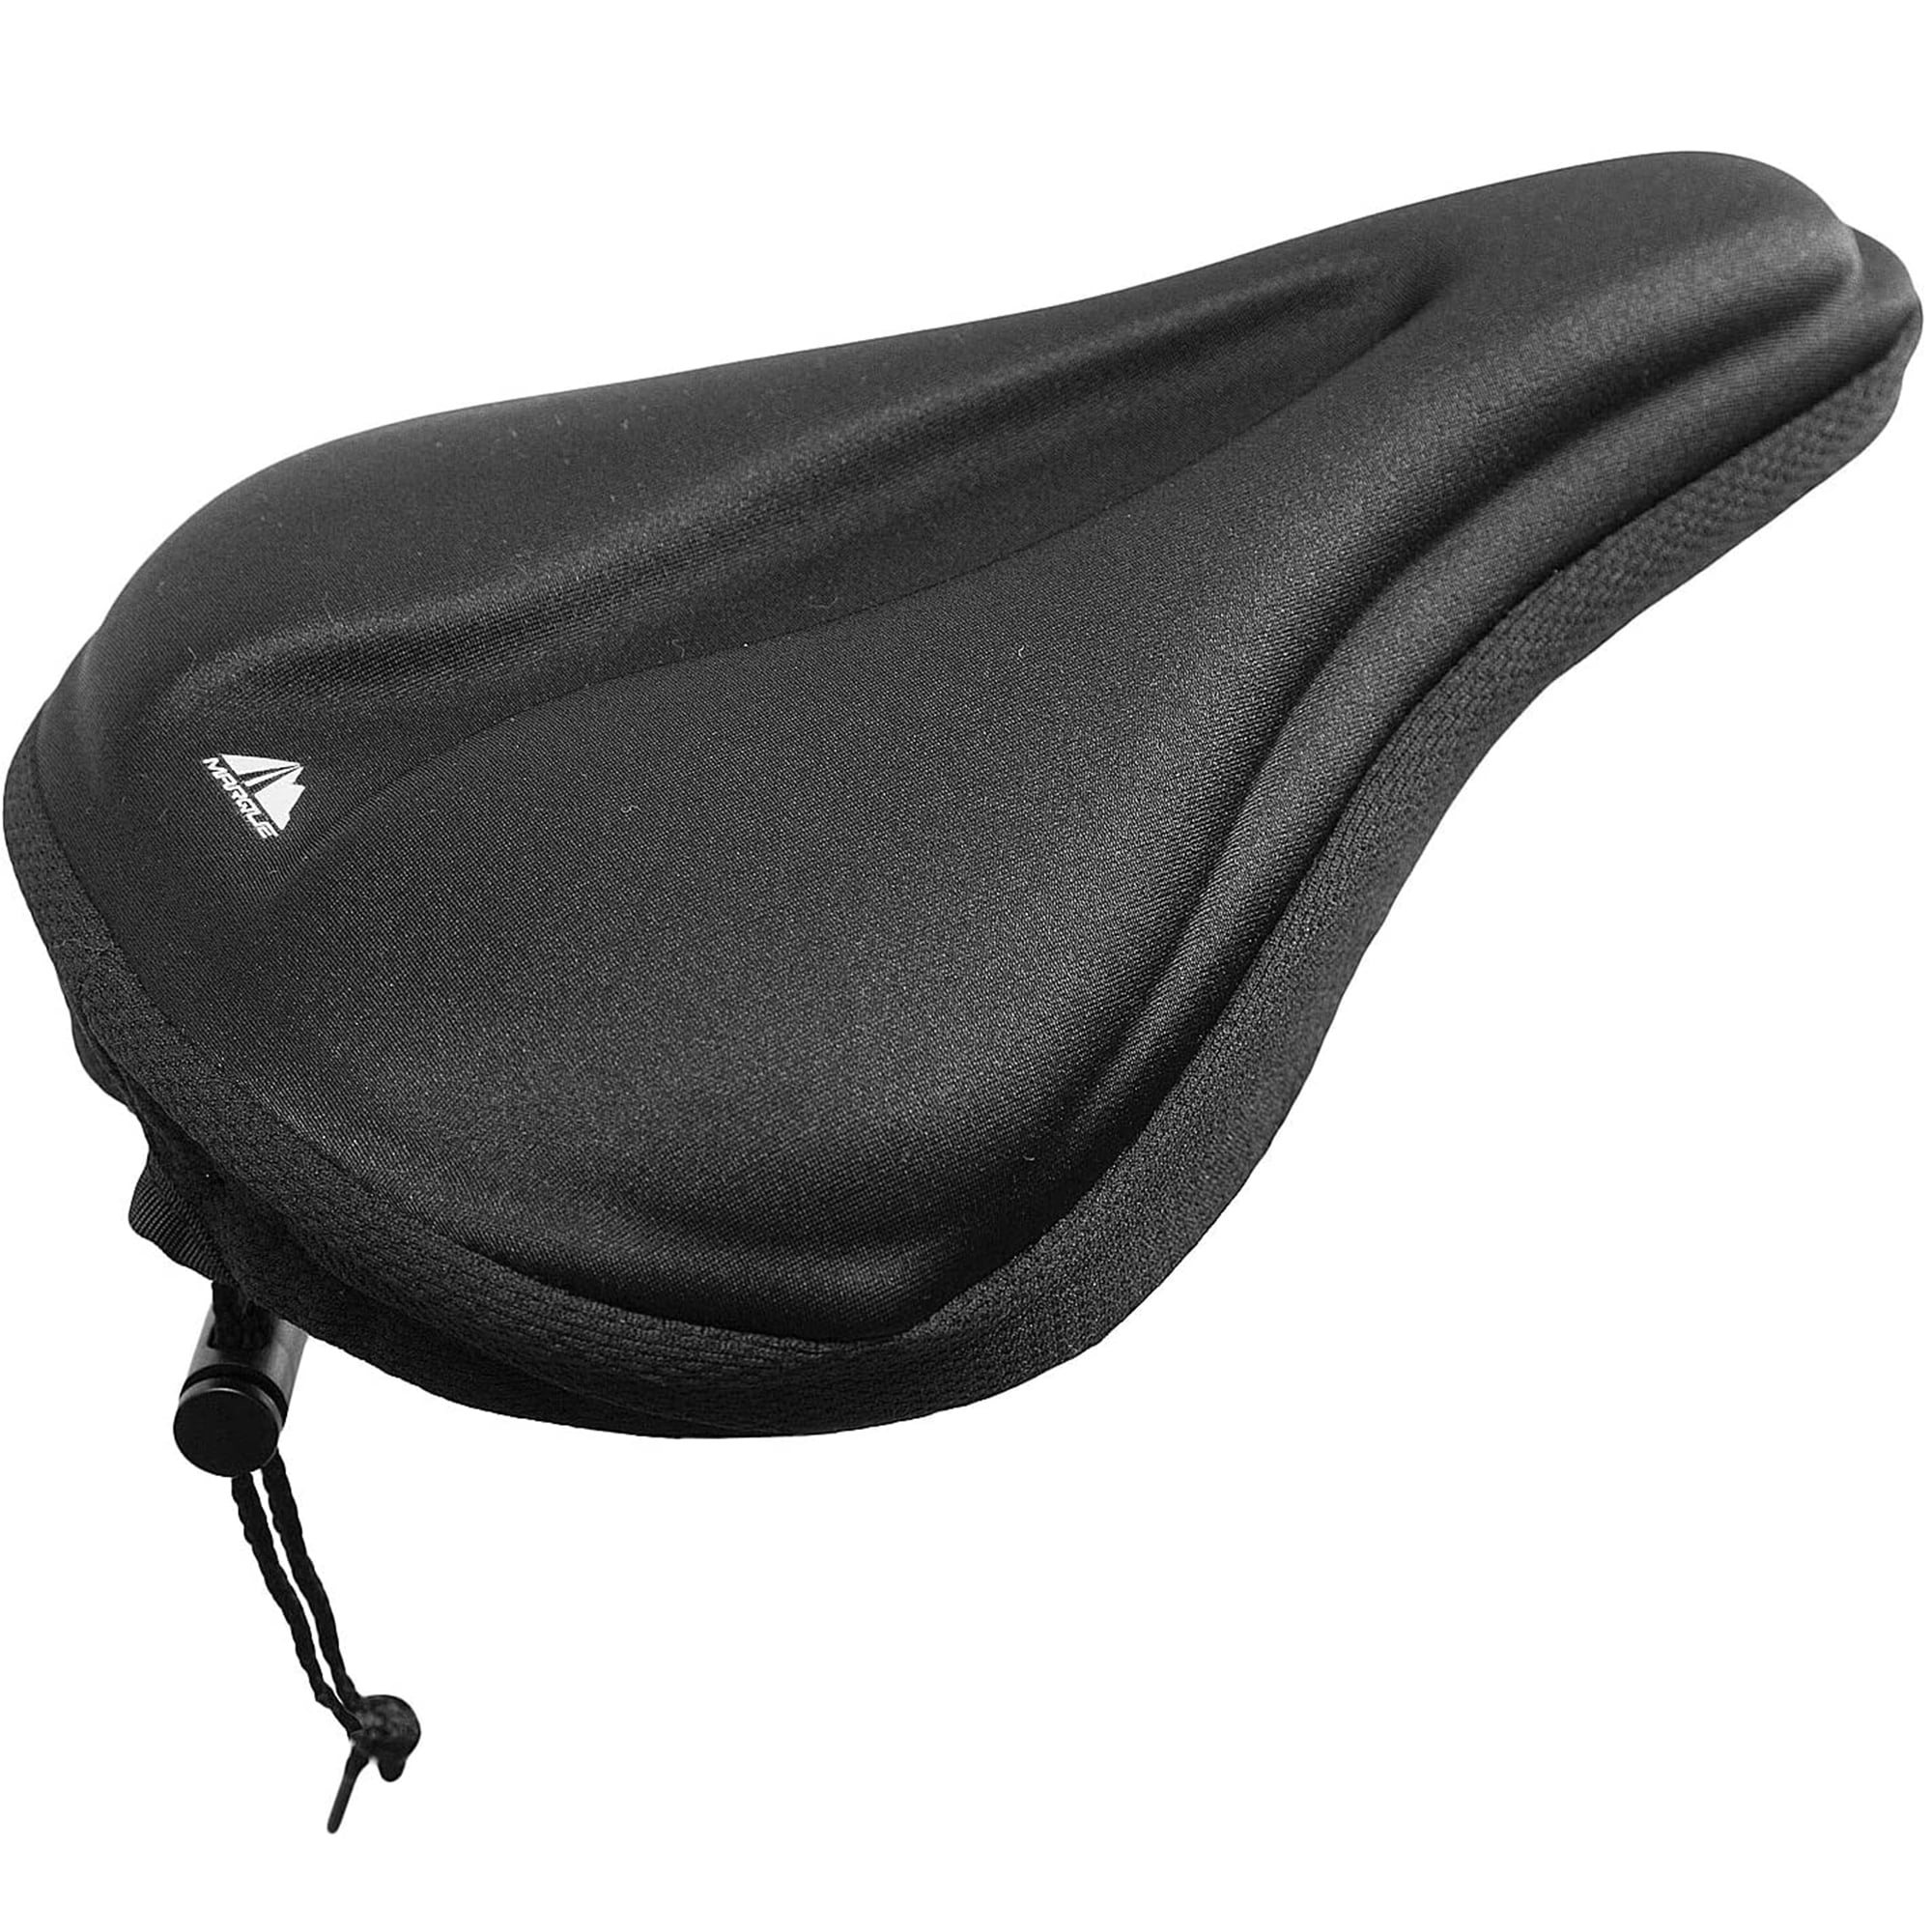 LKXOOD Bike Seat Cushion Comfortable Soft Wide Exercise Gel Bike Seat Cover Ergonomically designed for road and mountain bikes 